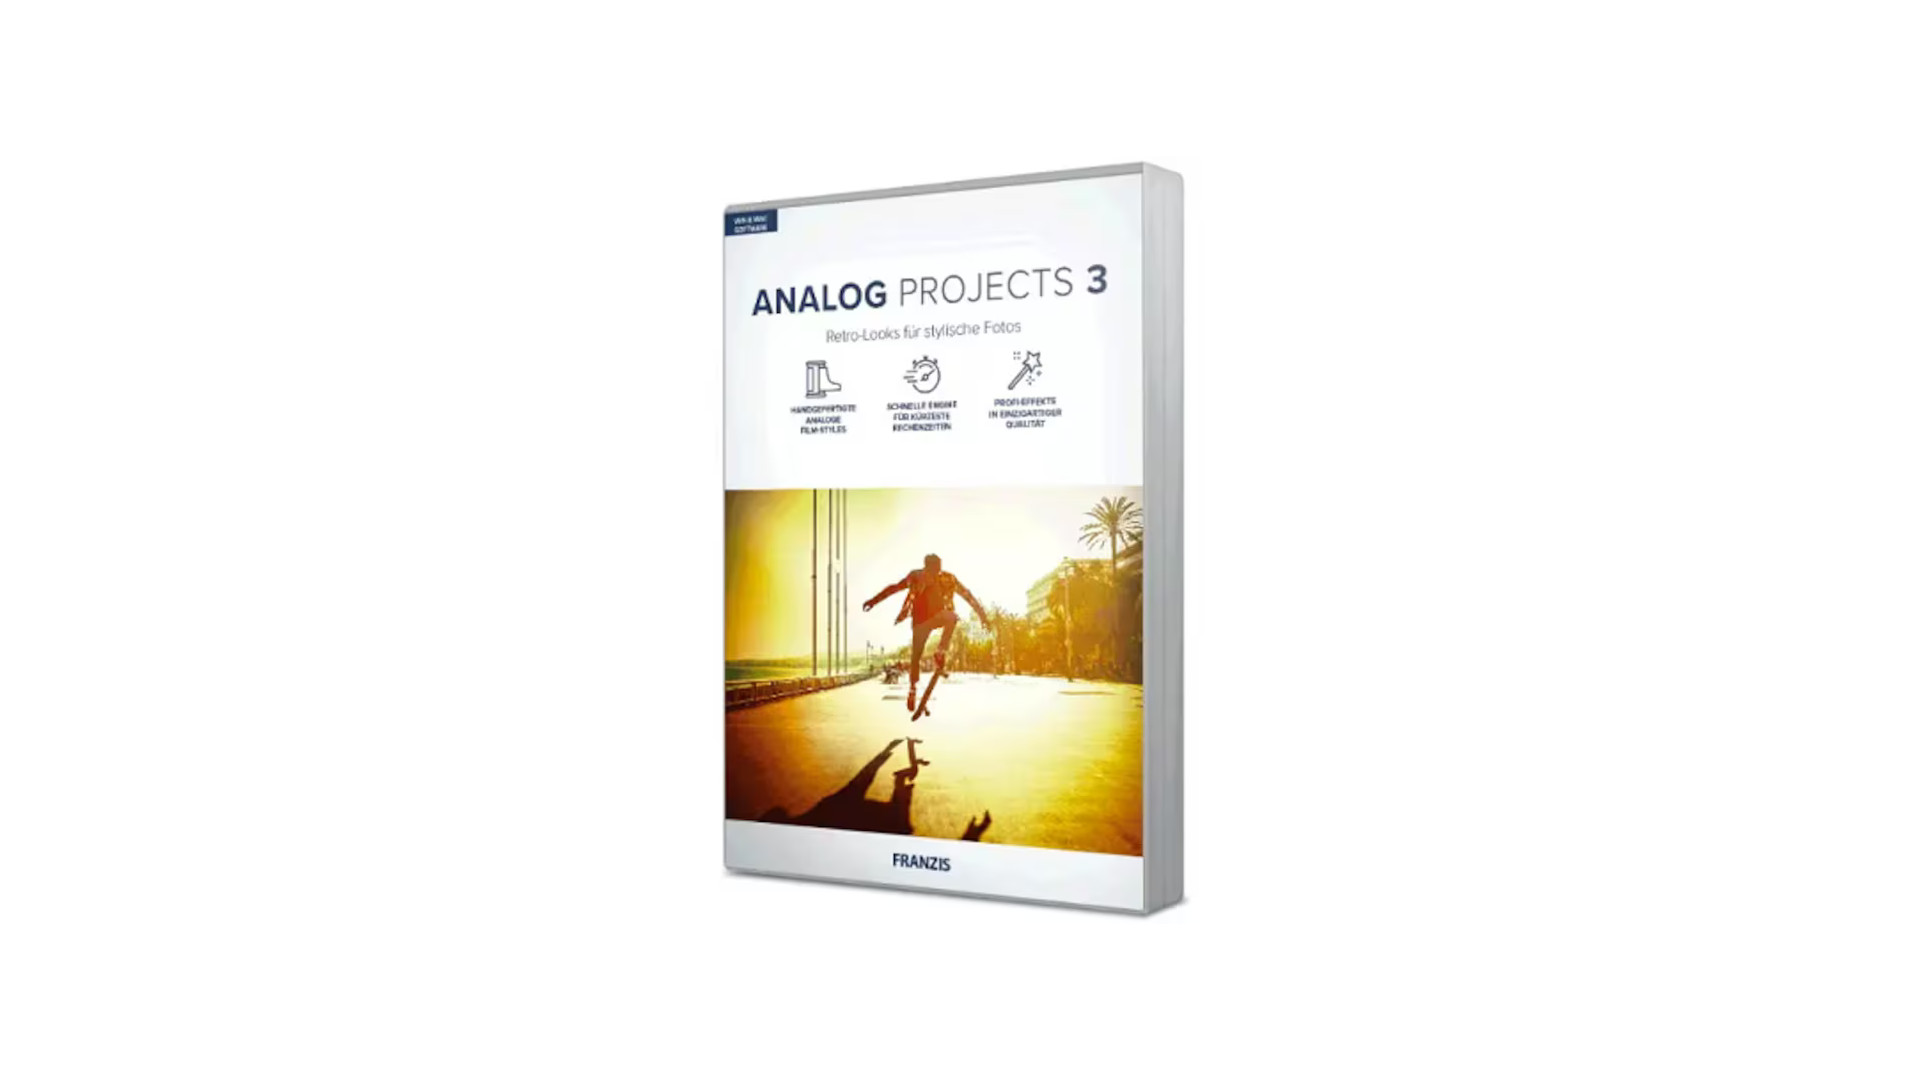 ANALOG projects 3 - Project Software Key (Lifetime / 1 PC) 33.89 usd